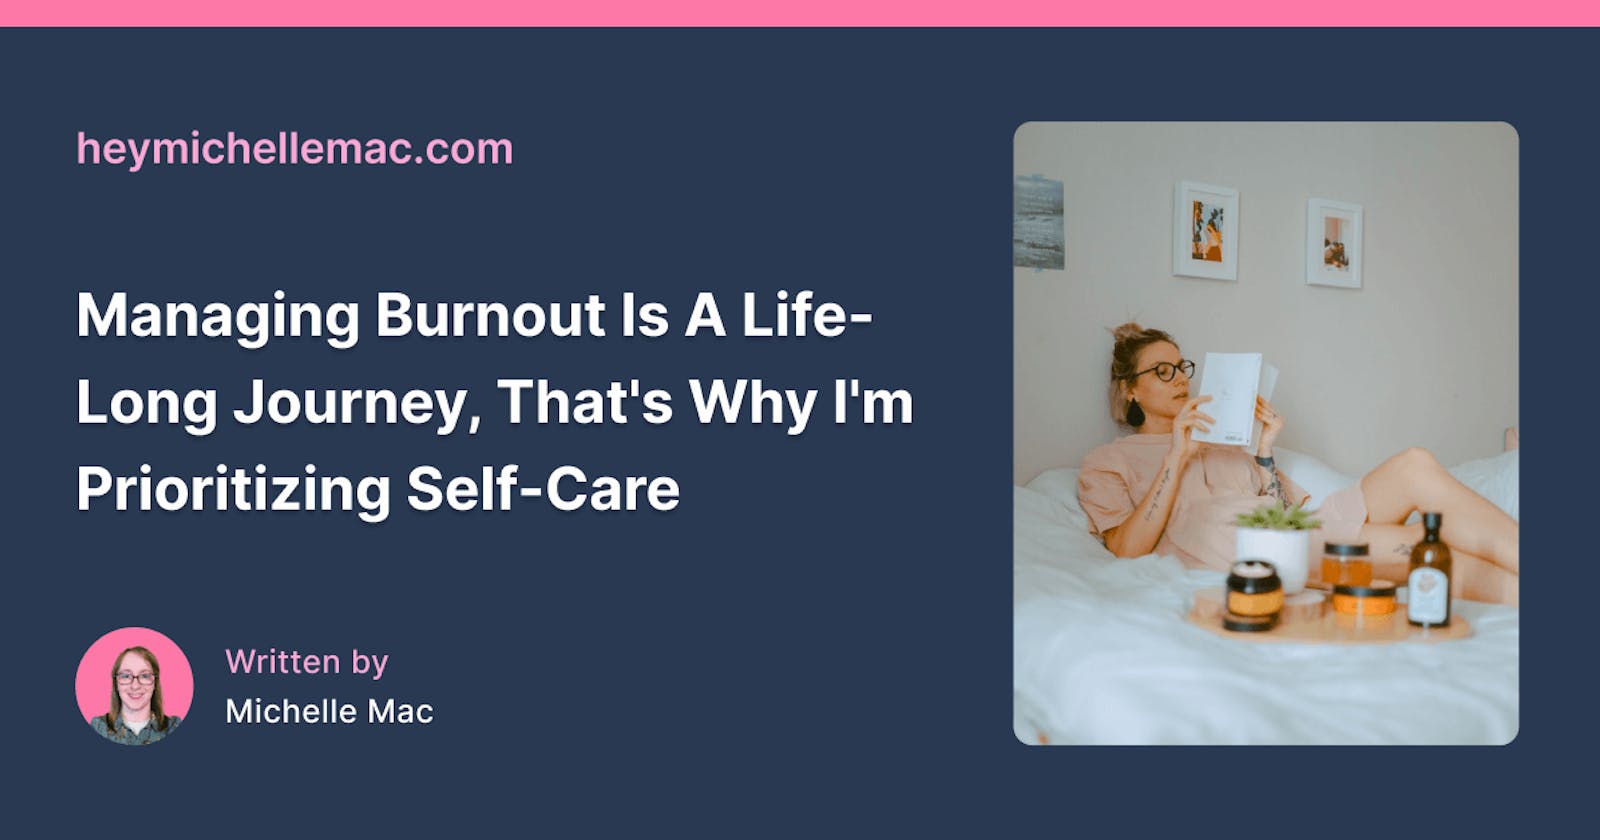 Managing Burnout Is A Life-Long Journey, That’s Why I’m Prioritizing Self-Care